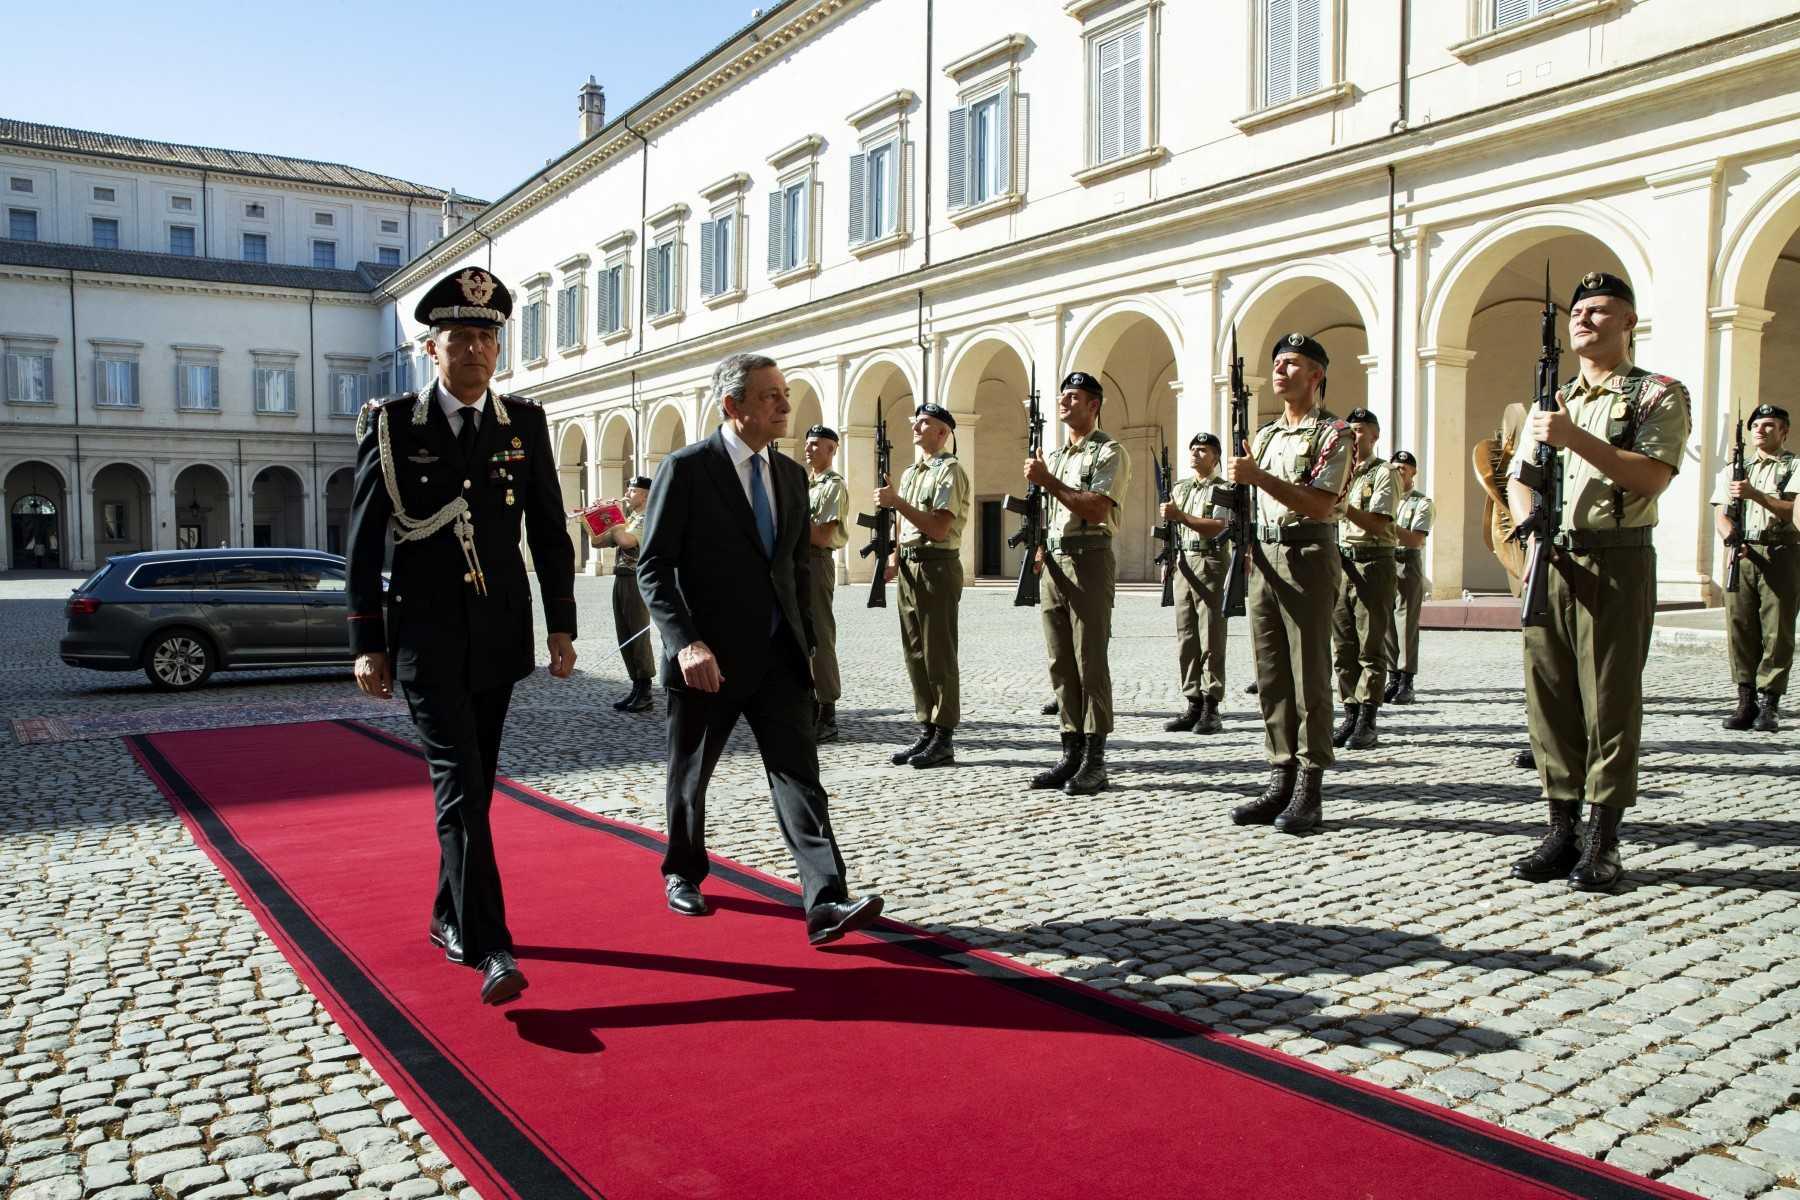 This handout picture taken and released by the press office of the presidential Quirinale Palace on July 21 shows Italy's Prime Minister Mario Draghi arriving to meet the president. Photo: AFP